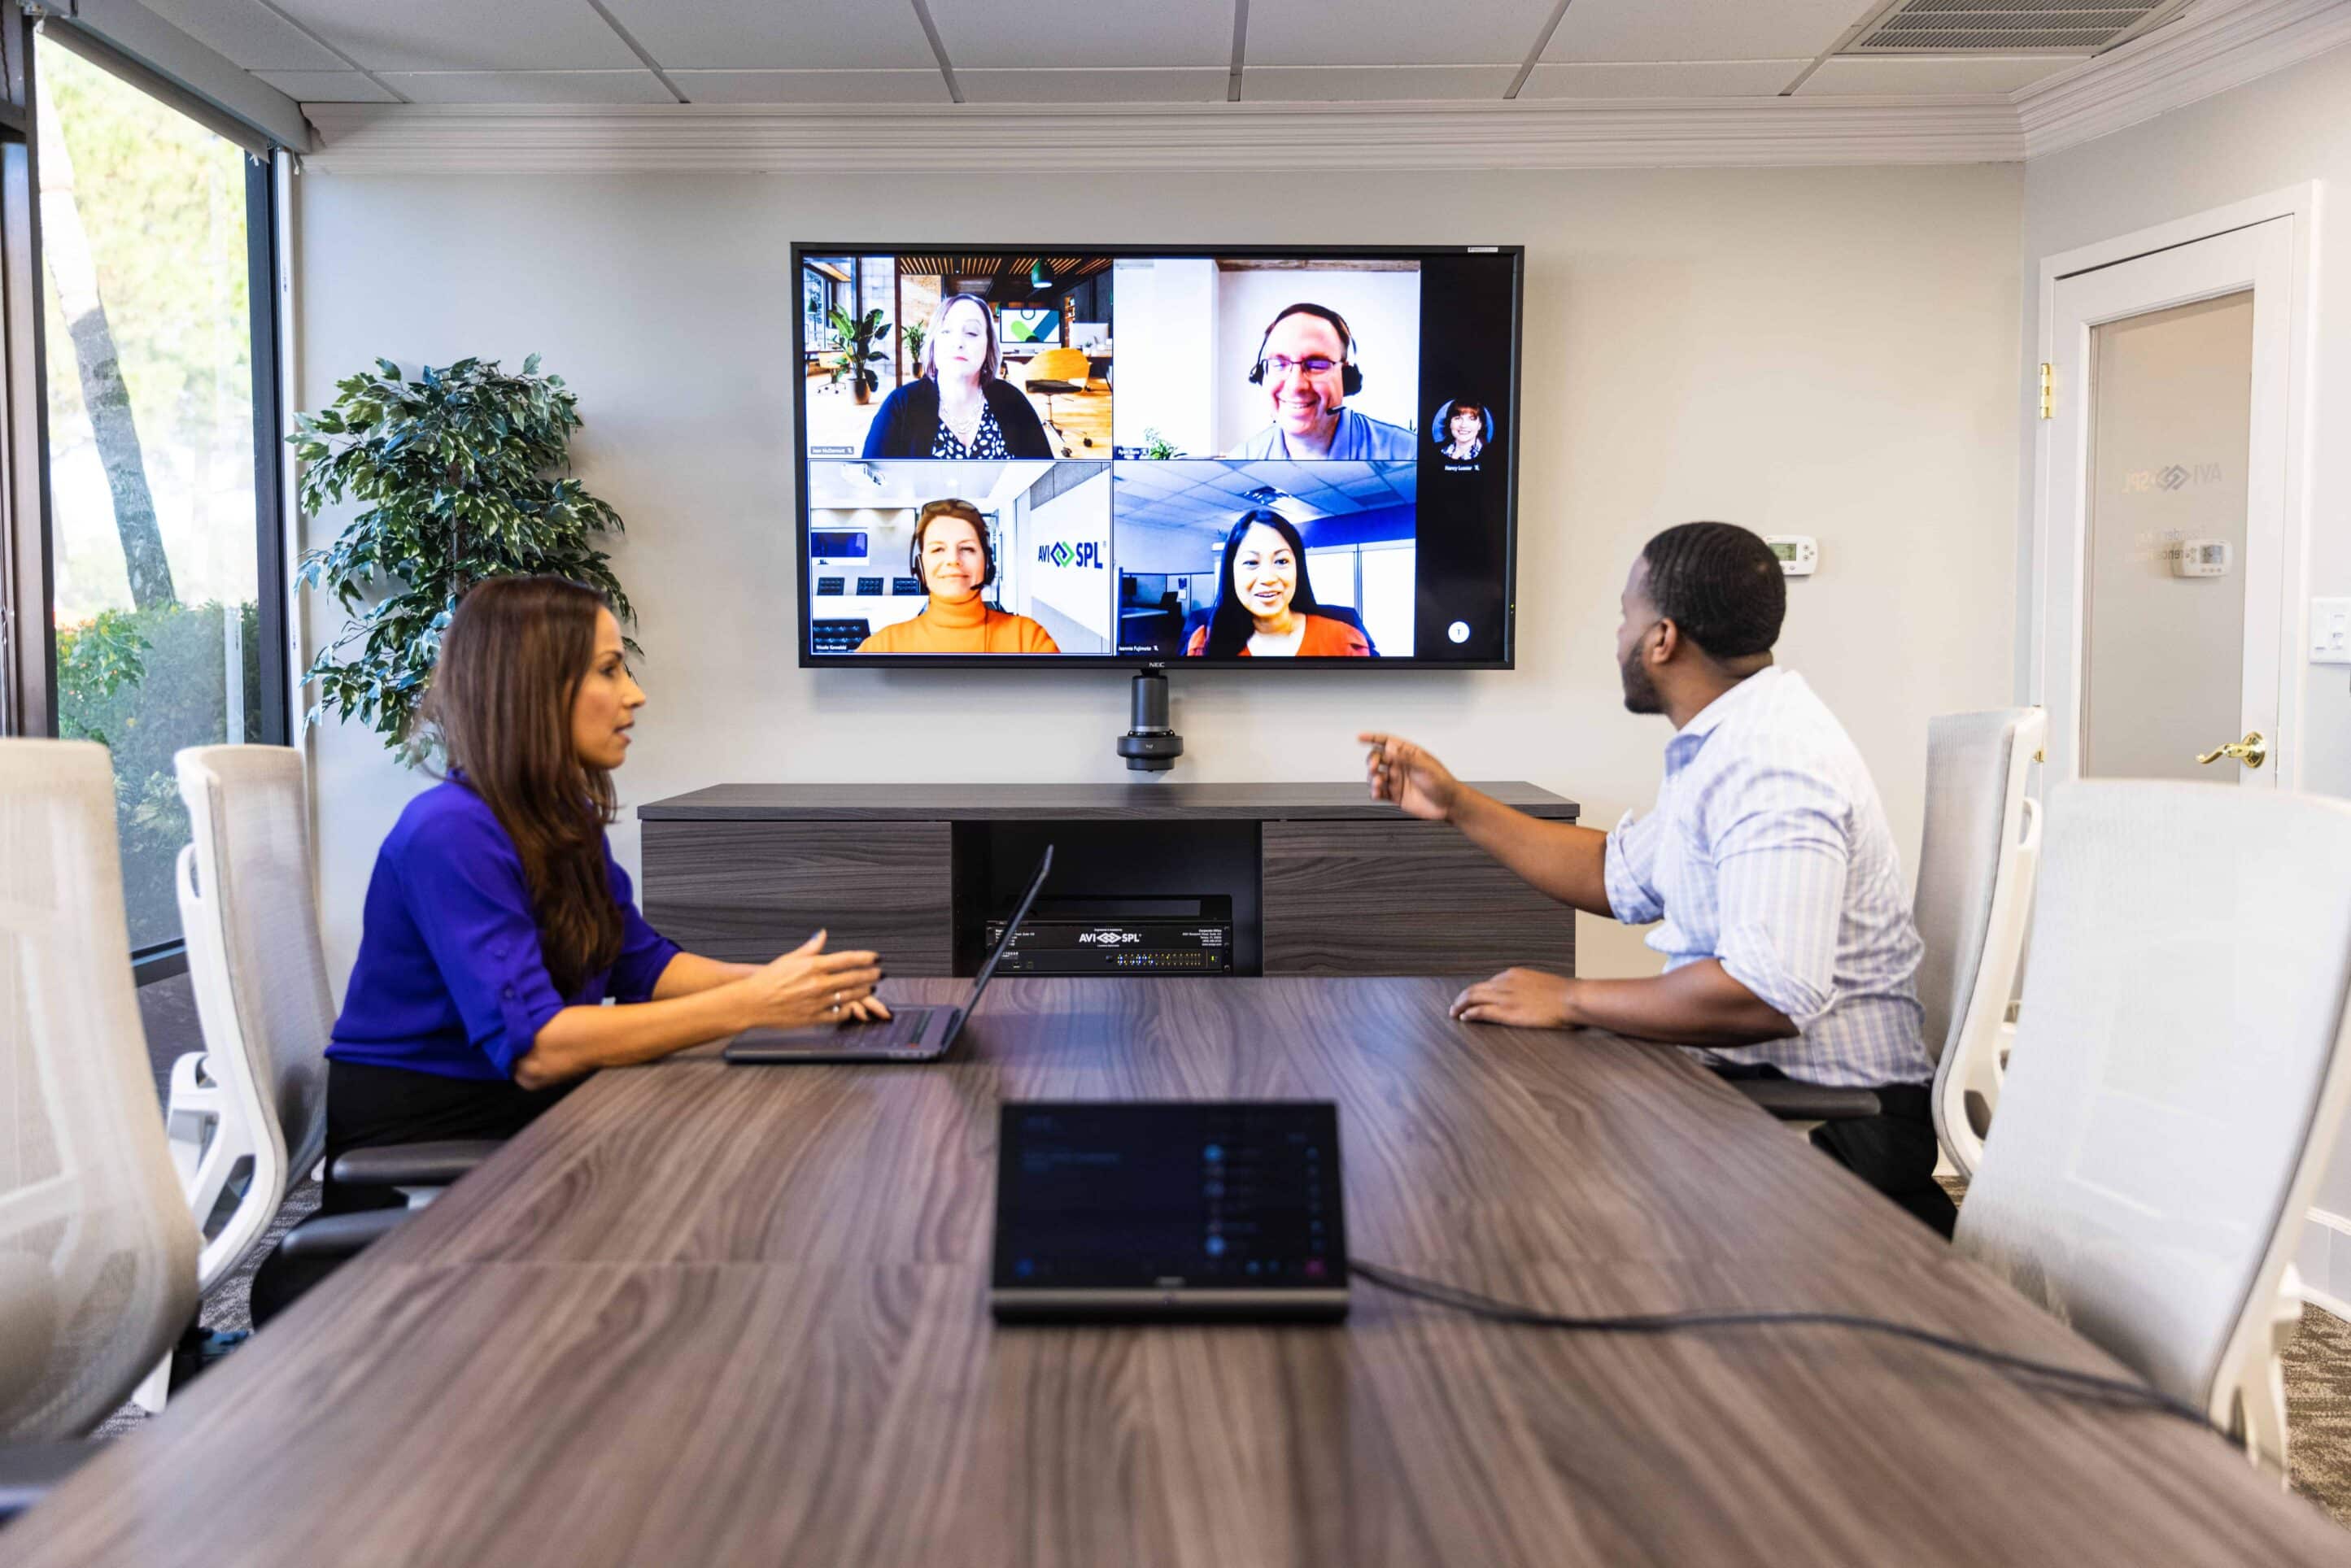 How IT can ensure secure collaboration in hybrid meetings